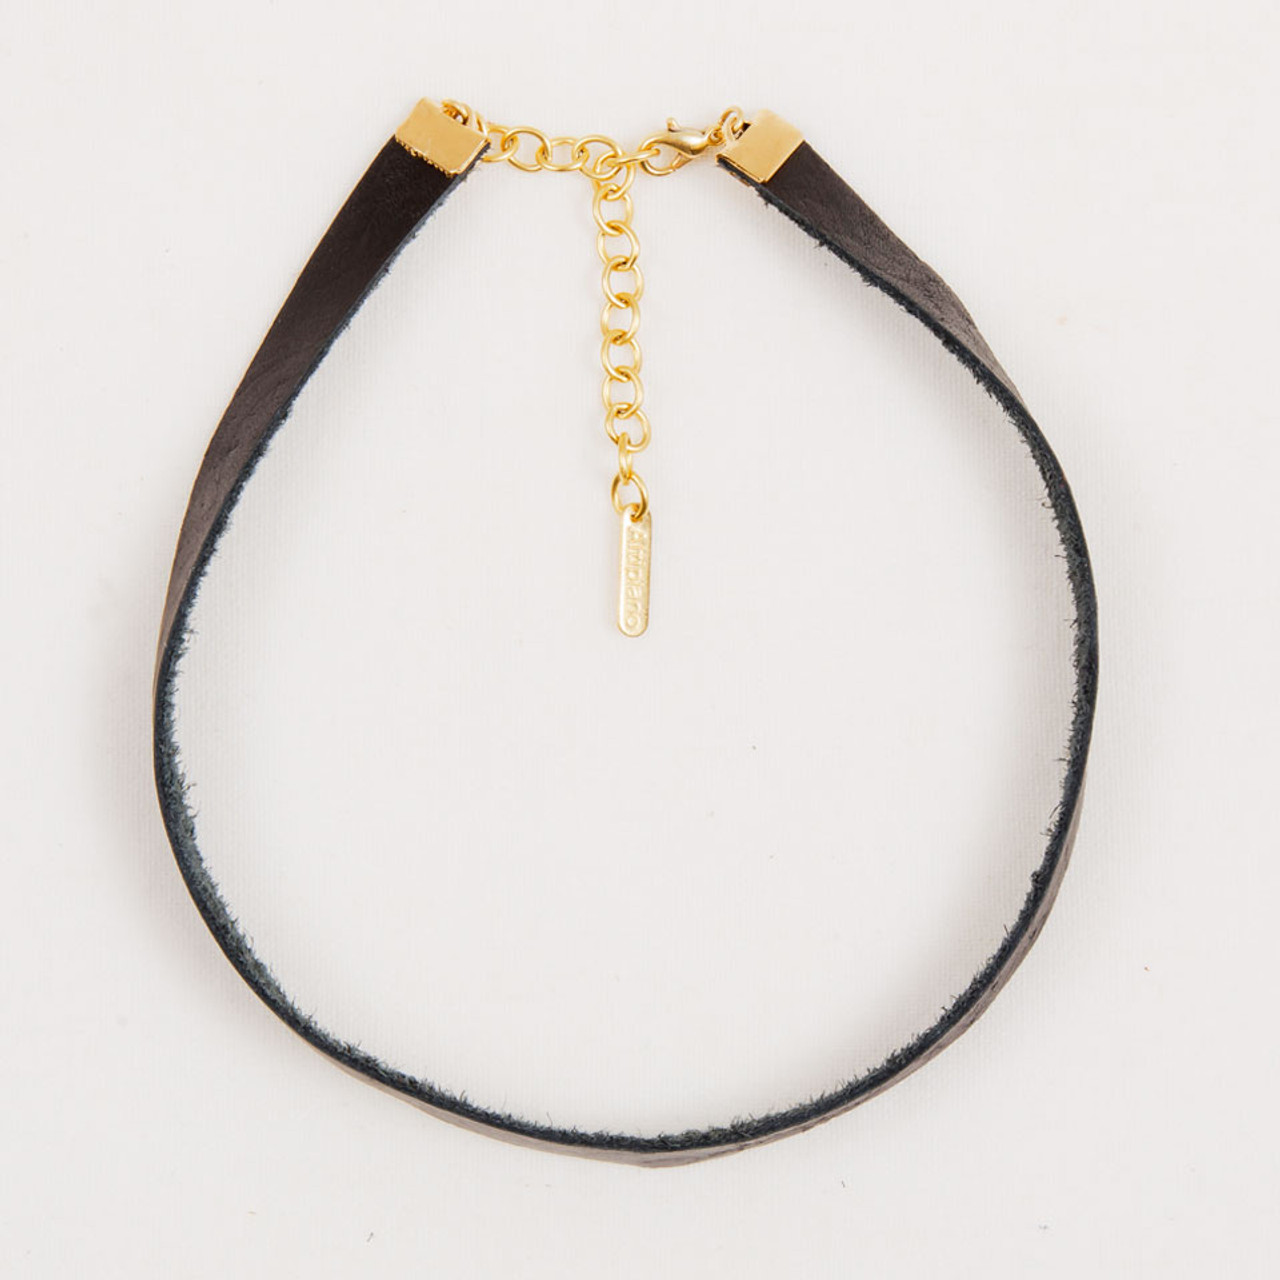 Classic O-Ring Day Collar | Leather choker necklace, Leather chokers,  Chokers